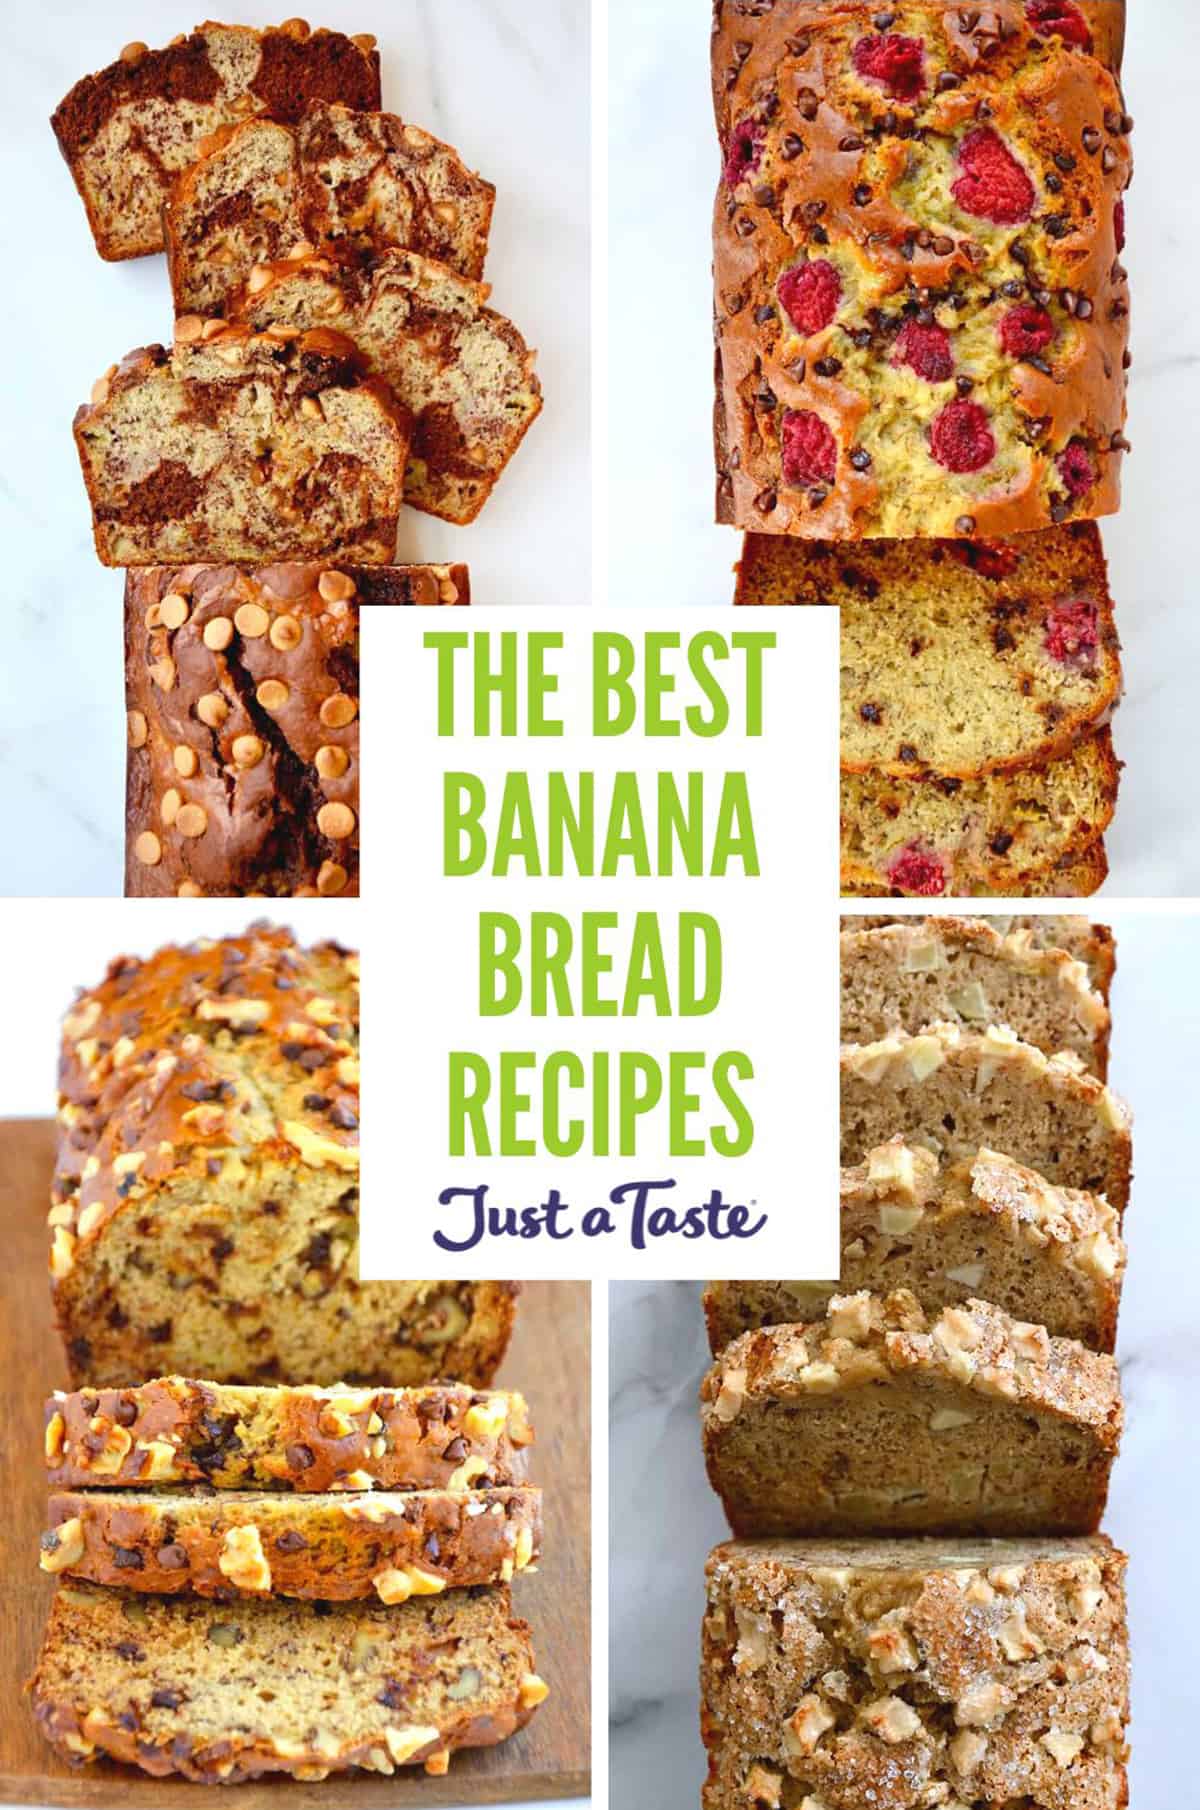 A collage of banana bread recipes, including chocolate peanut butter banana bread, raspberry chocolate chip banana bread, apple cinnamon banana bread, and moist banana bread studded with nuts and chocolate chips.